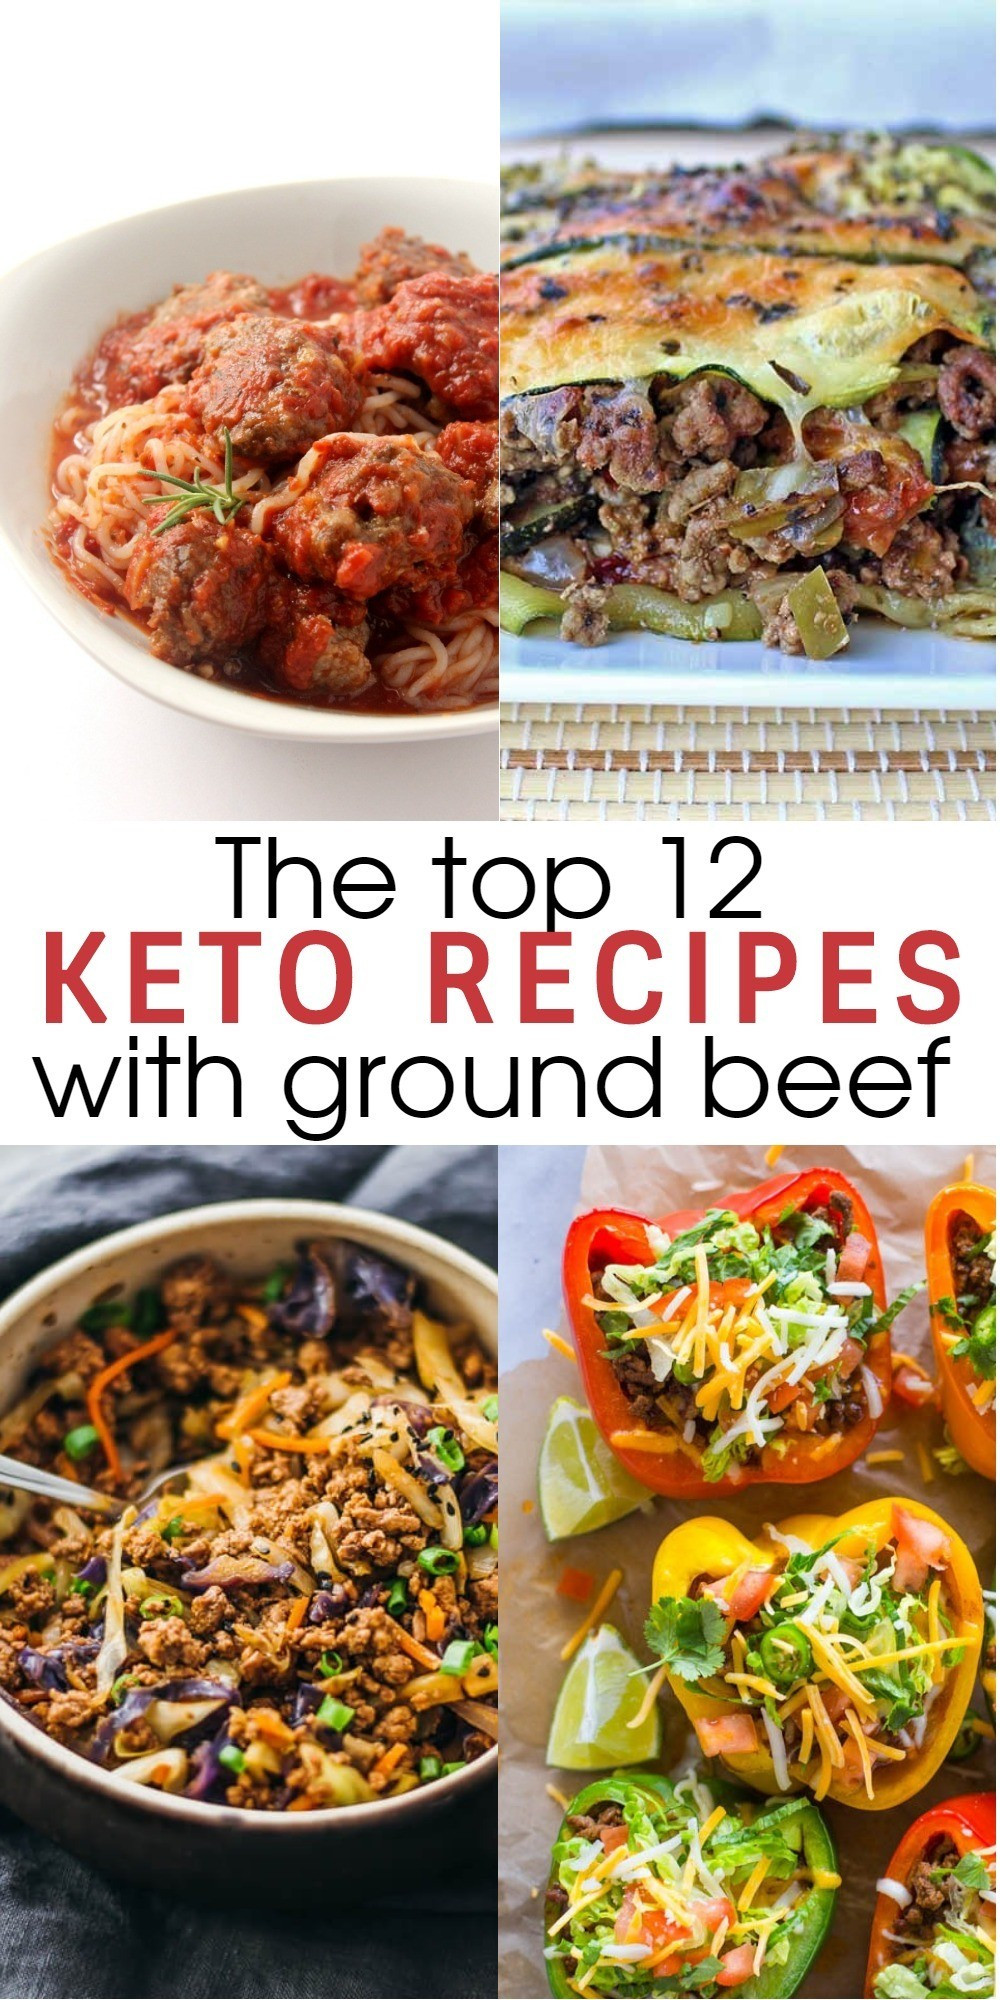 Keto Dinner Recipes Beef
 12 Flavorful and Easy Keto Recipes With Ground Beef To Try